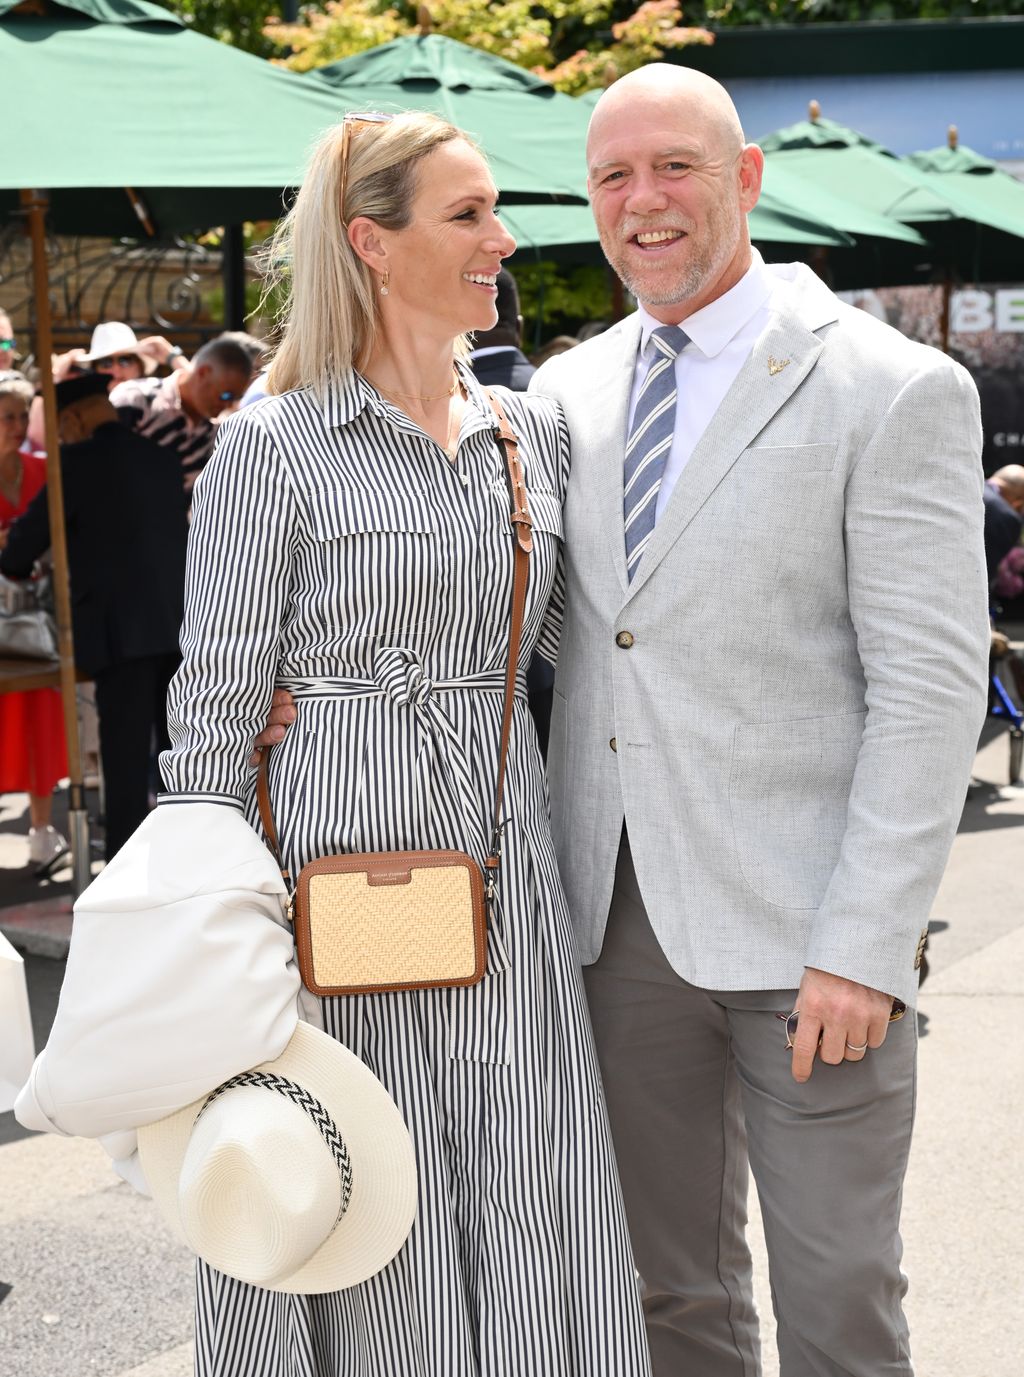 Zara Tindall looks at husband Mike Tindall as they arrive at Wimbledon